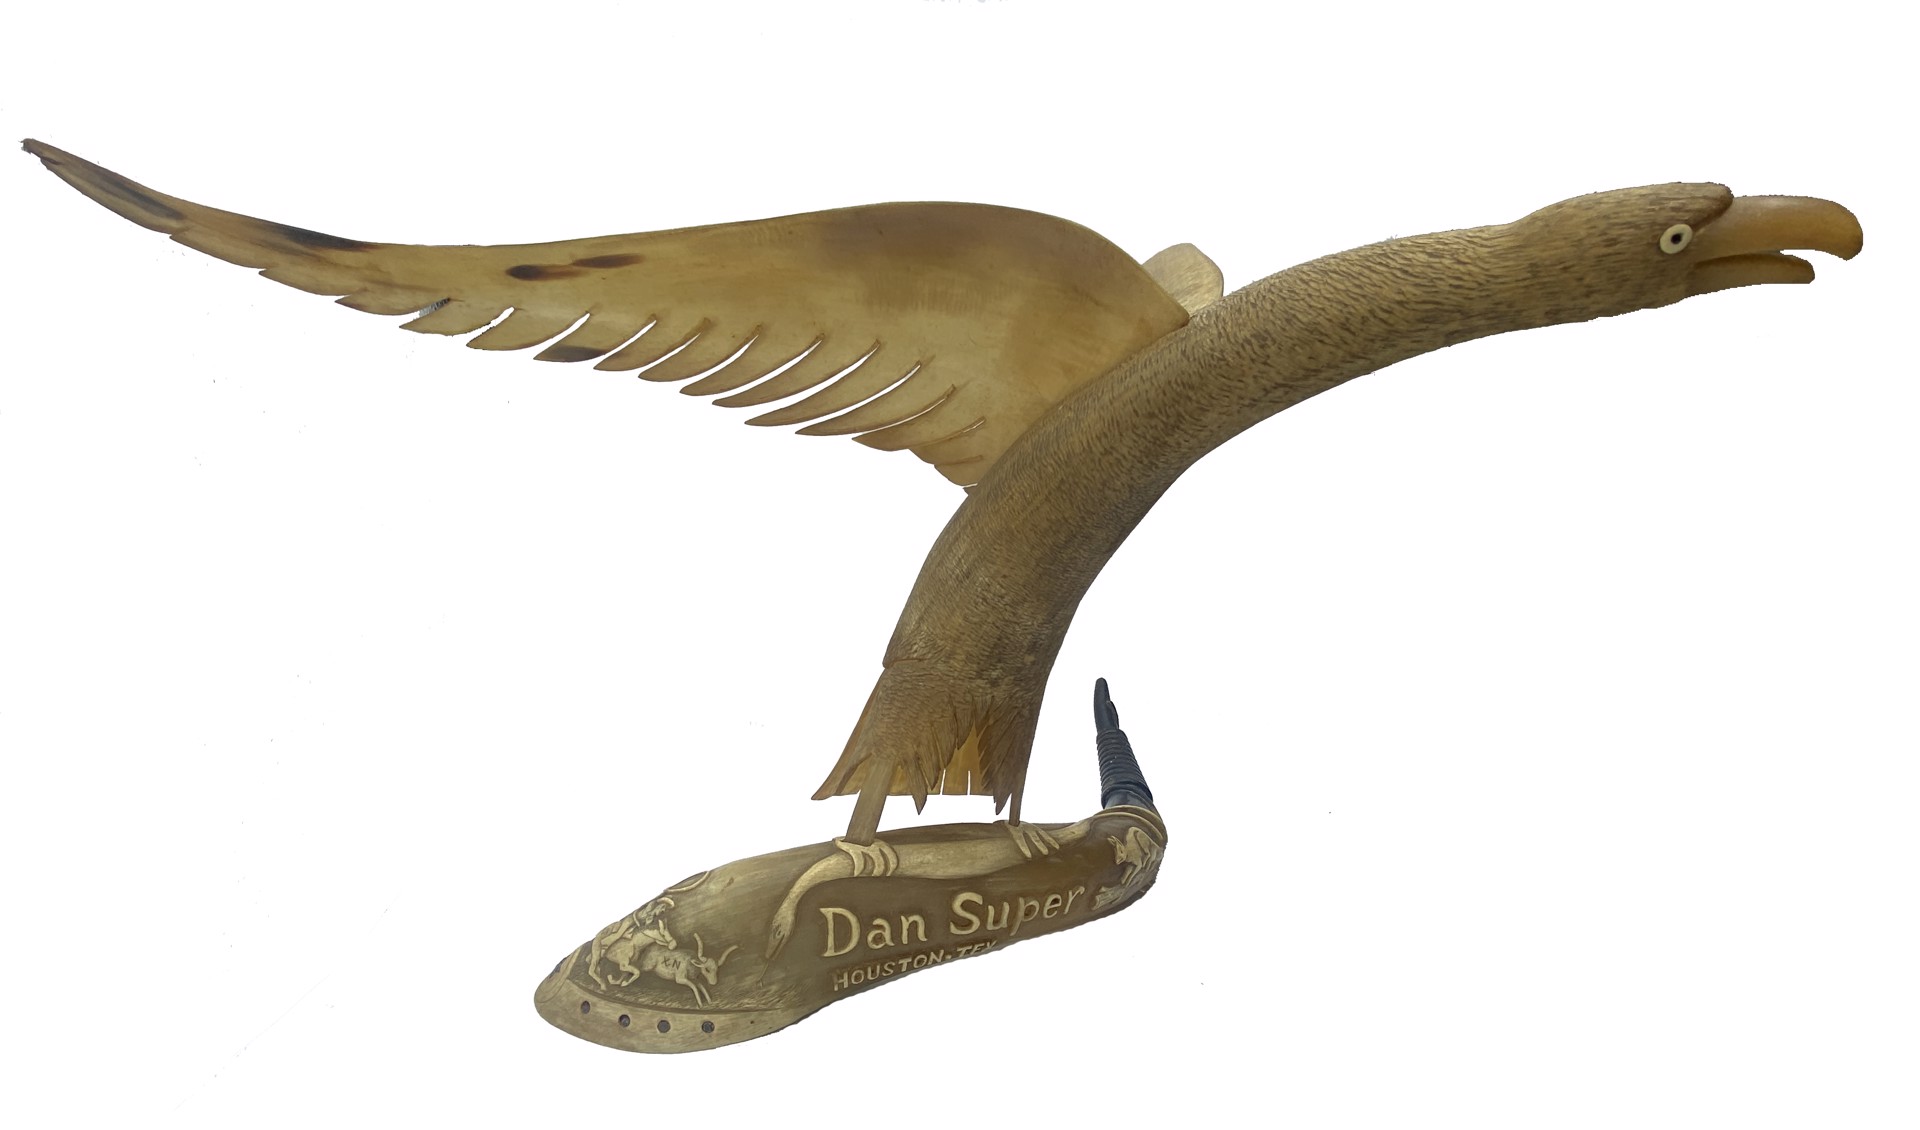 DS-65: large blonde carved horn bird with removable wings on large horn (bird has snake in claws) cowboy roping steer with XN brand and rattelsnake tail around horn point, fox on a log (Dan Super, Houston, Tex), bird can be removed from horn by Dan Super